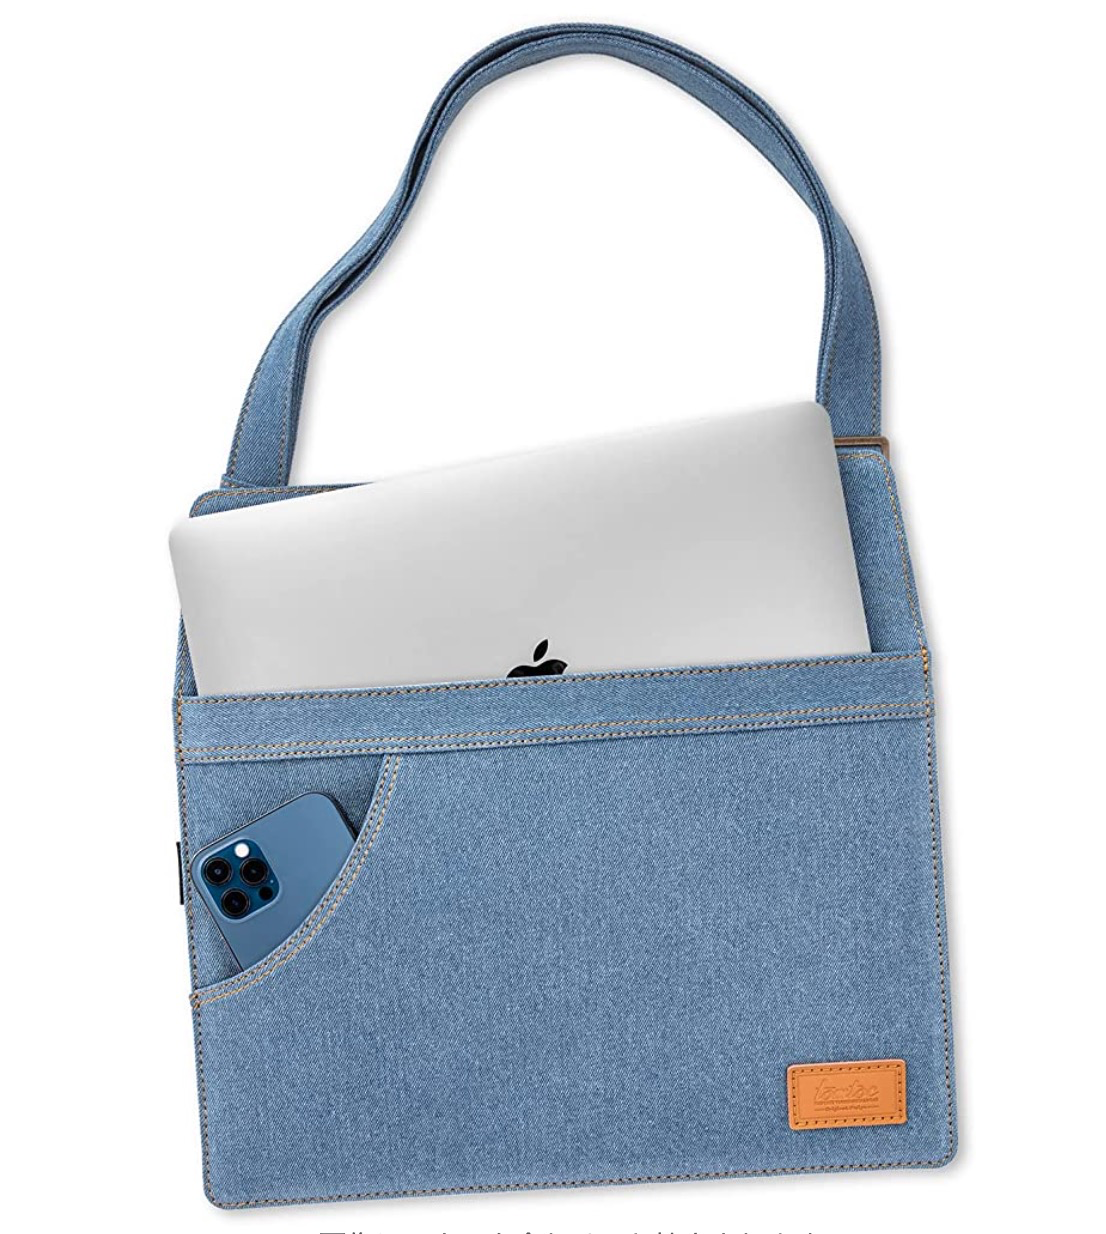 primary_The Her-H26 Denim Shoulder Bag For 13-inch MacBook Air And Pro